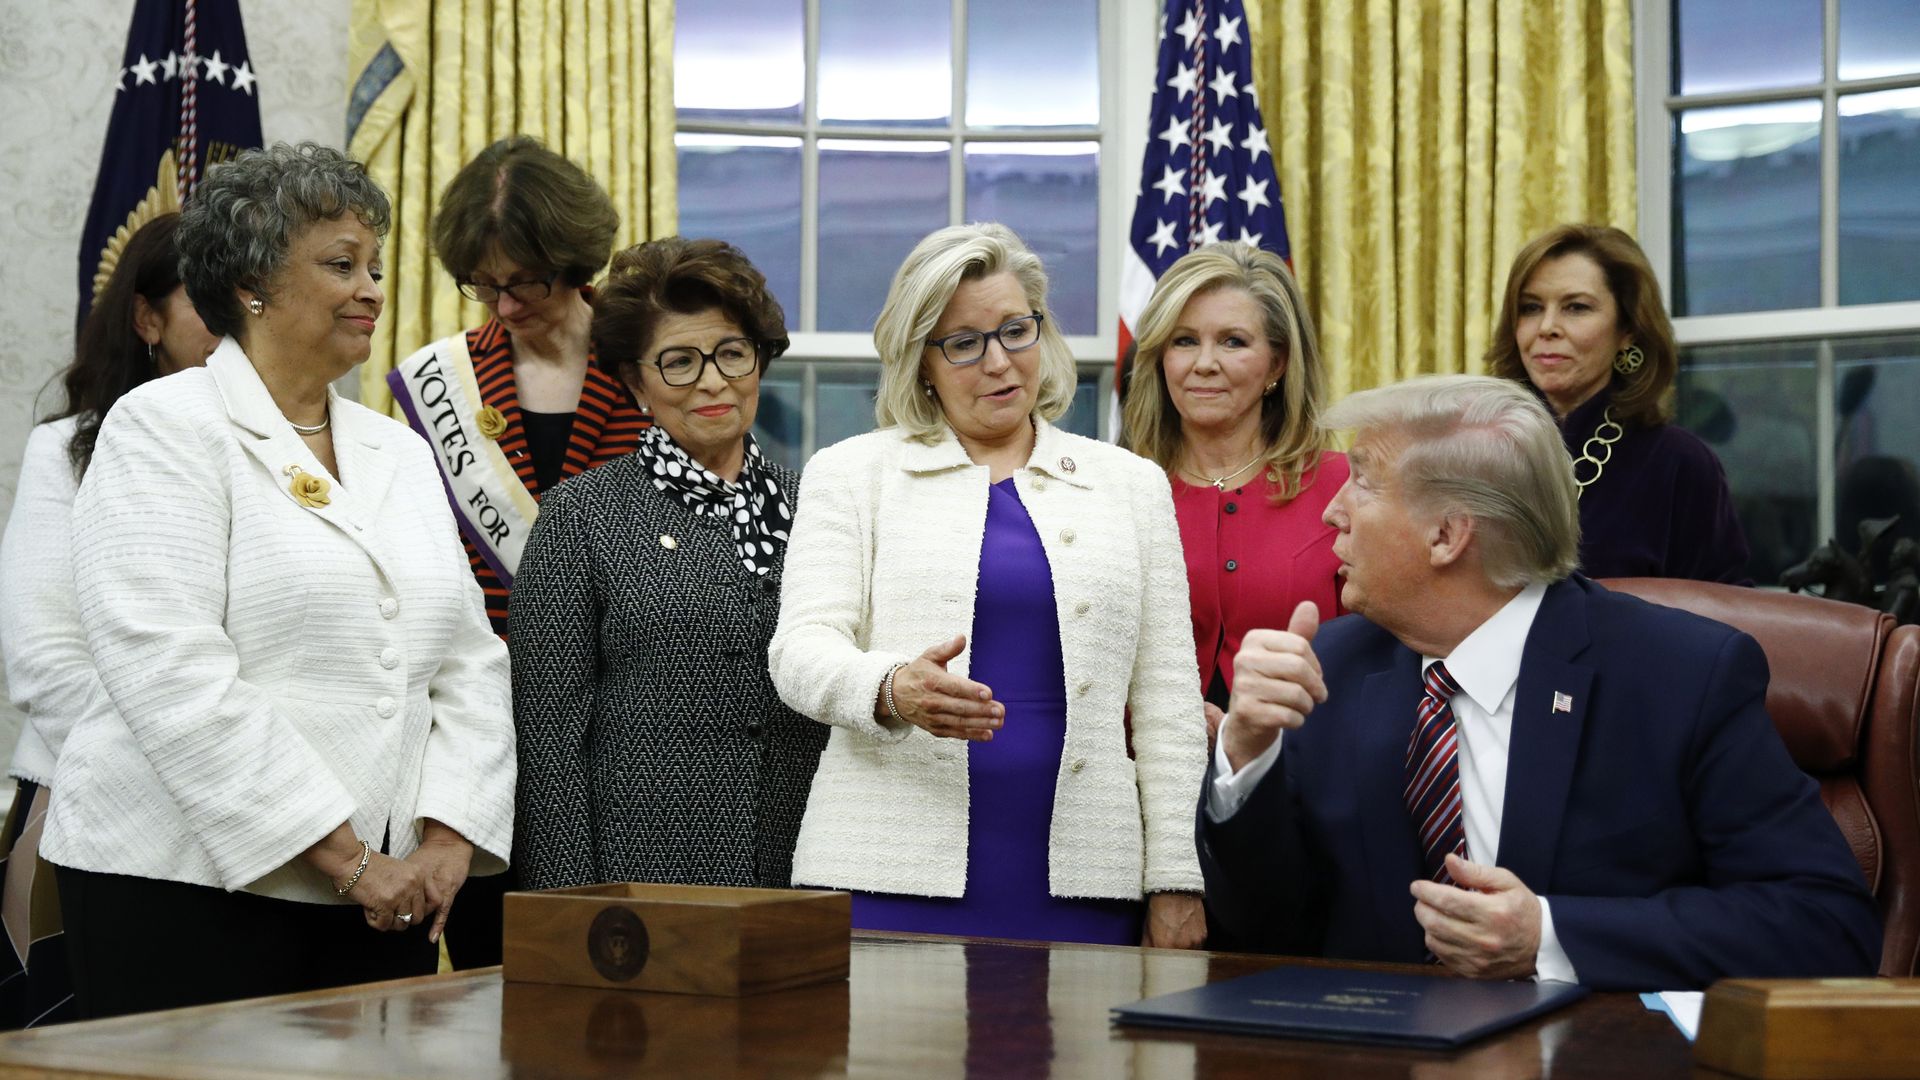 Liz Cheney with other women lawmakers in Trump's office